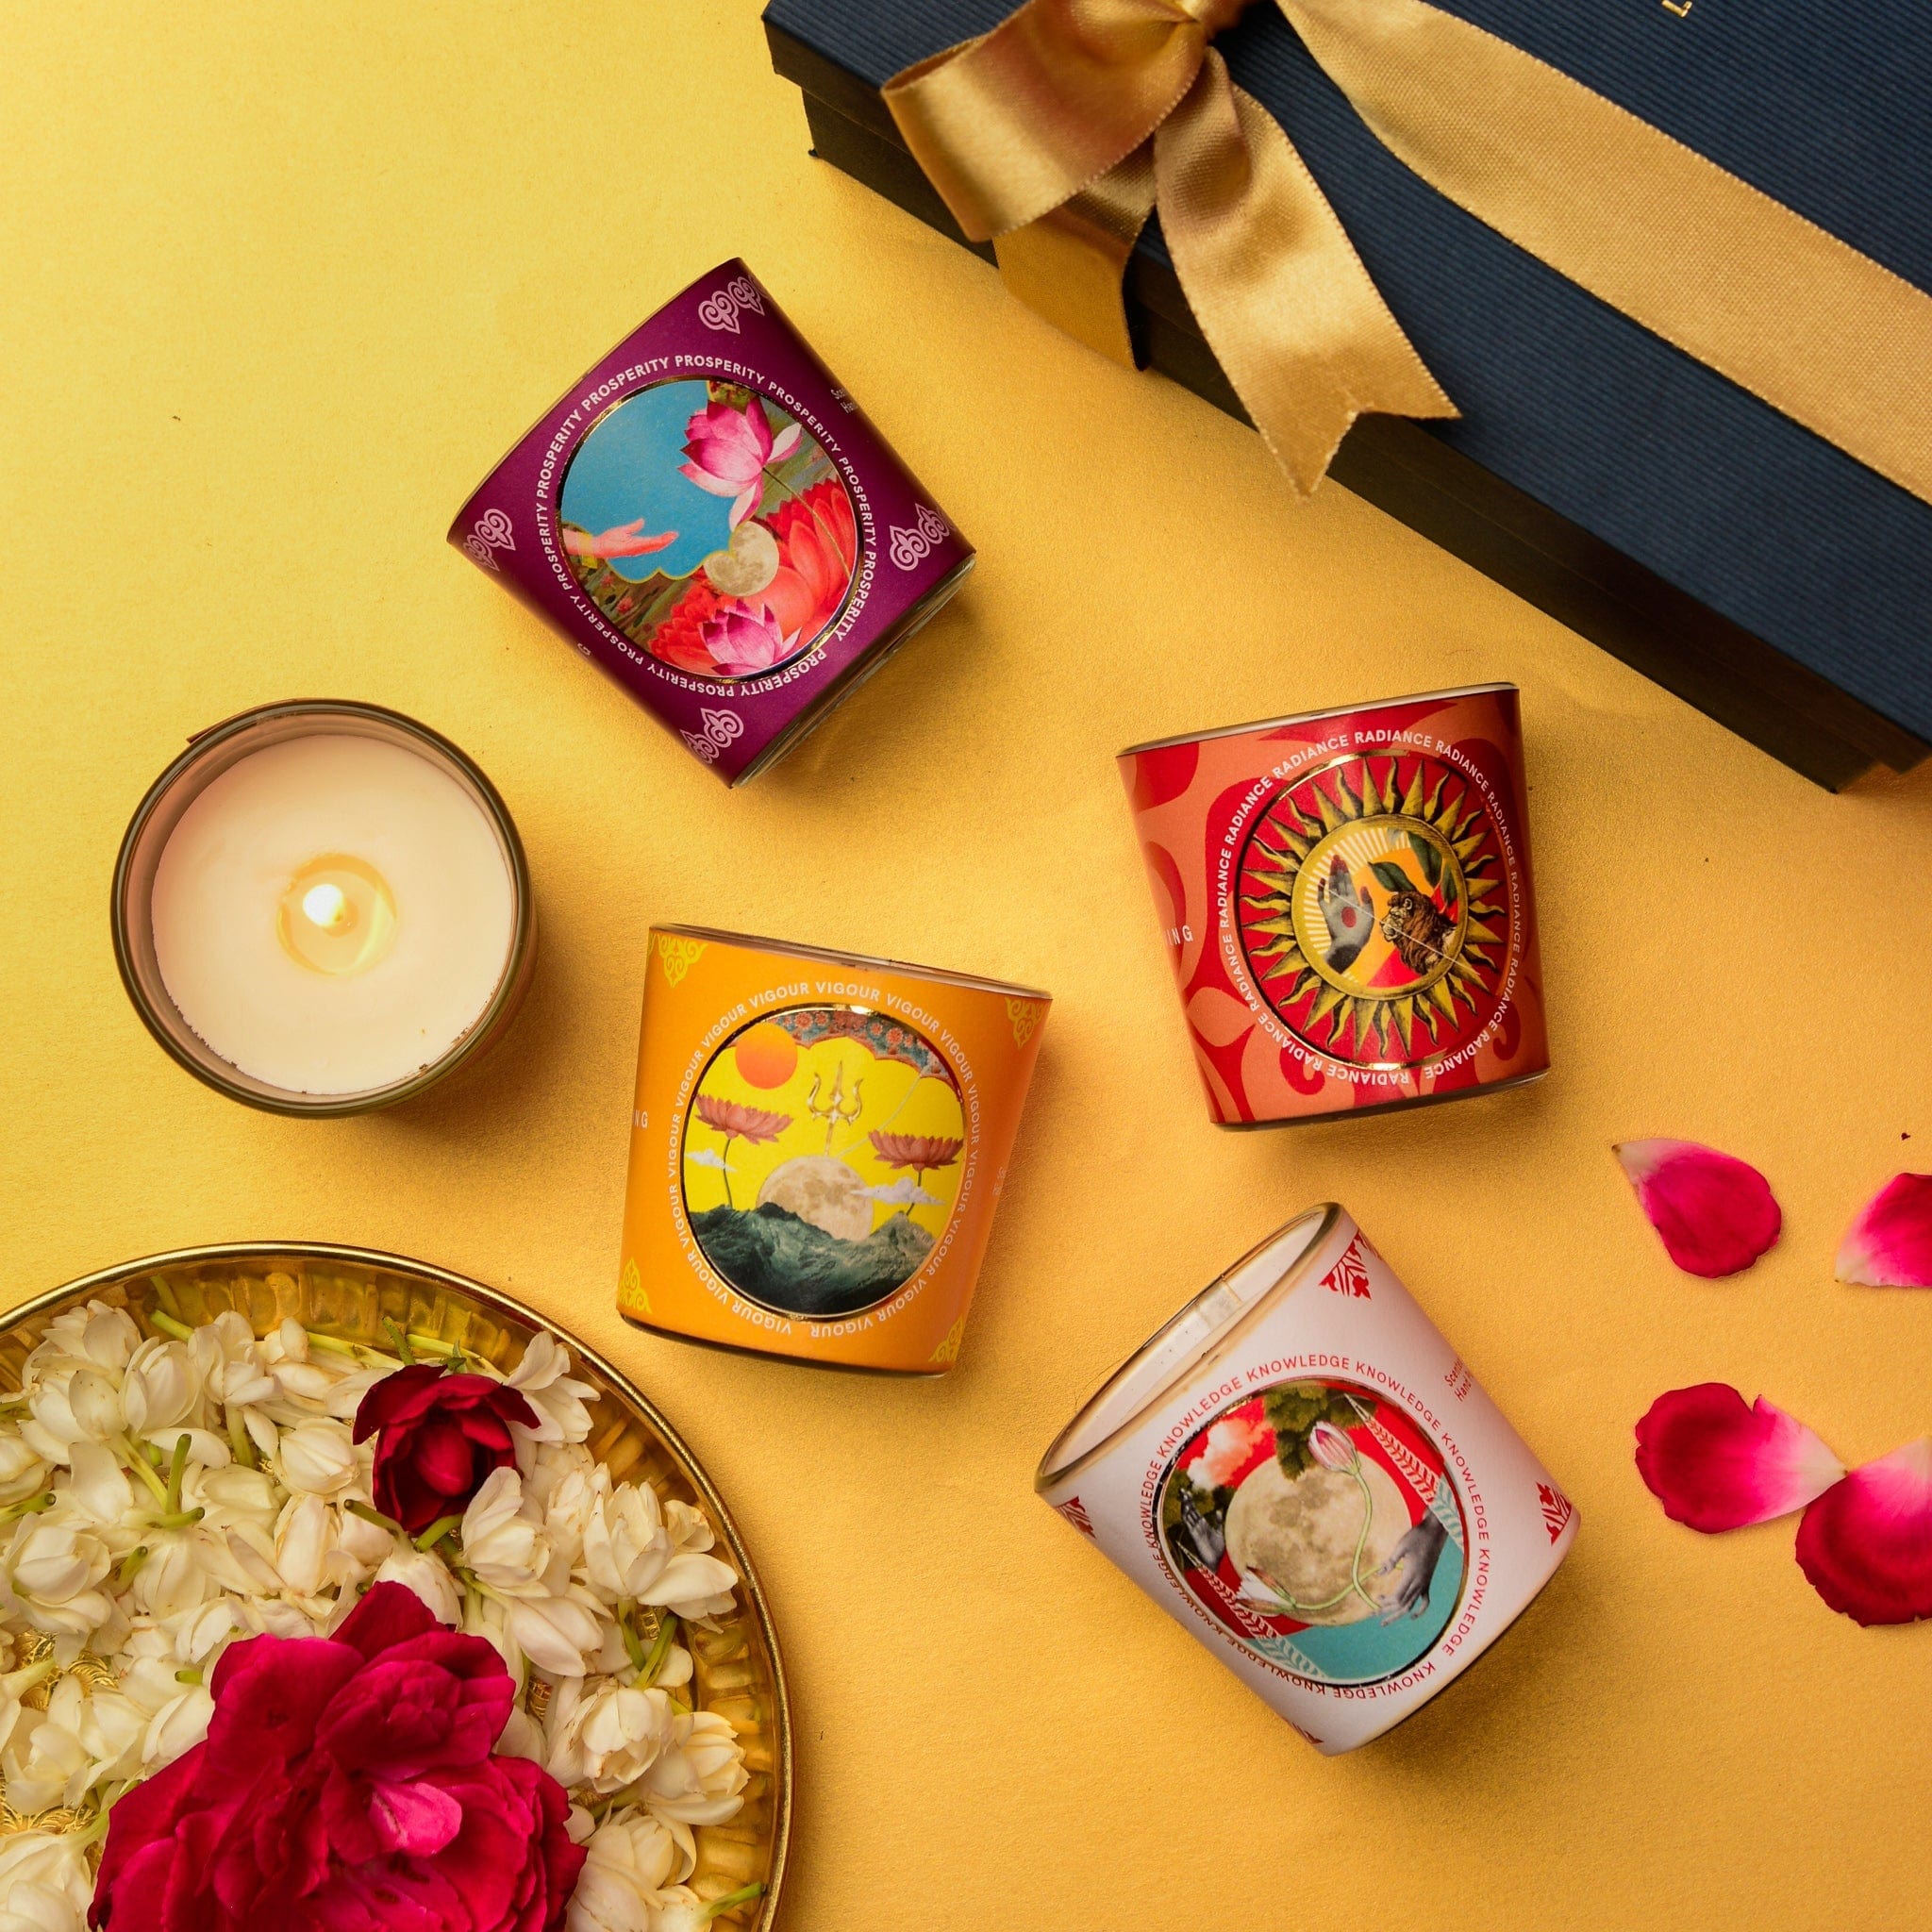 The Abundance Gift Box - 4 Scented Votive Candles